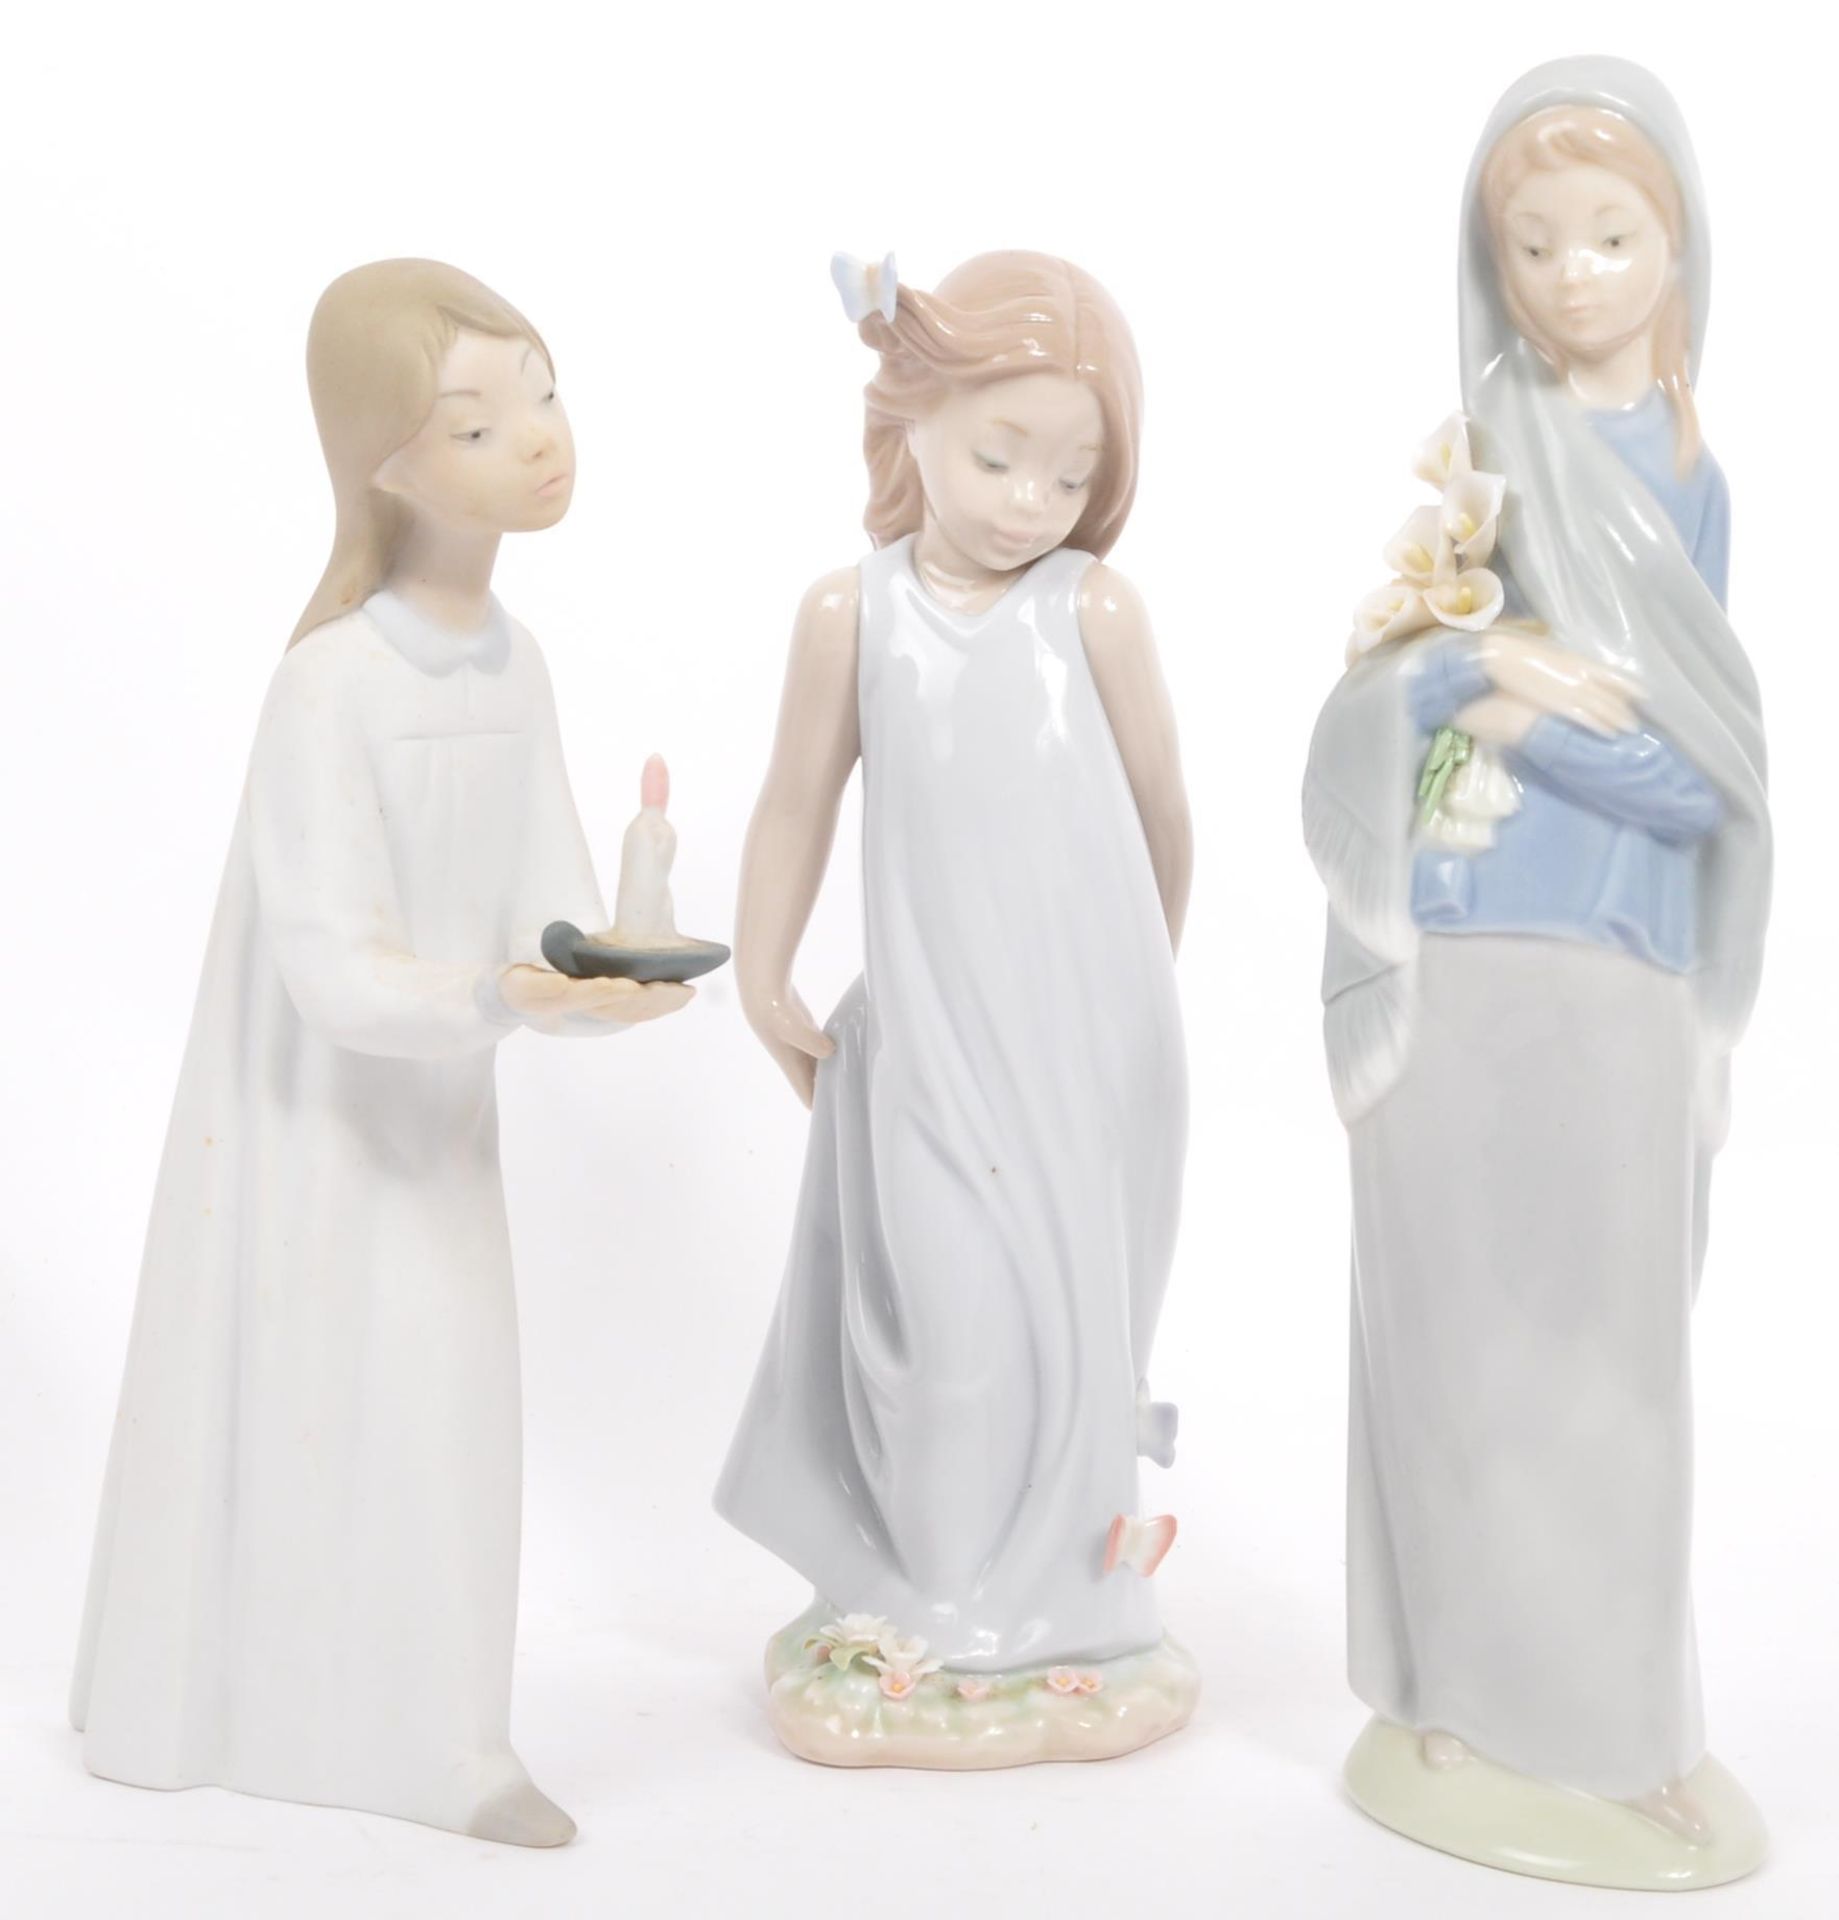 COLLECTION OF SIX VINTAGE NAO BY LLADRO PORCELAIN FIGURINES - Image 4 of 7